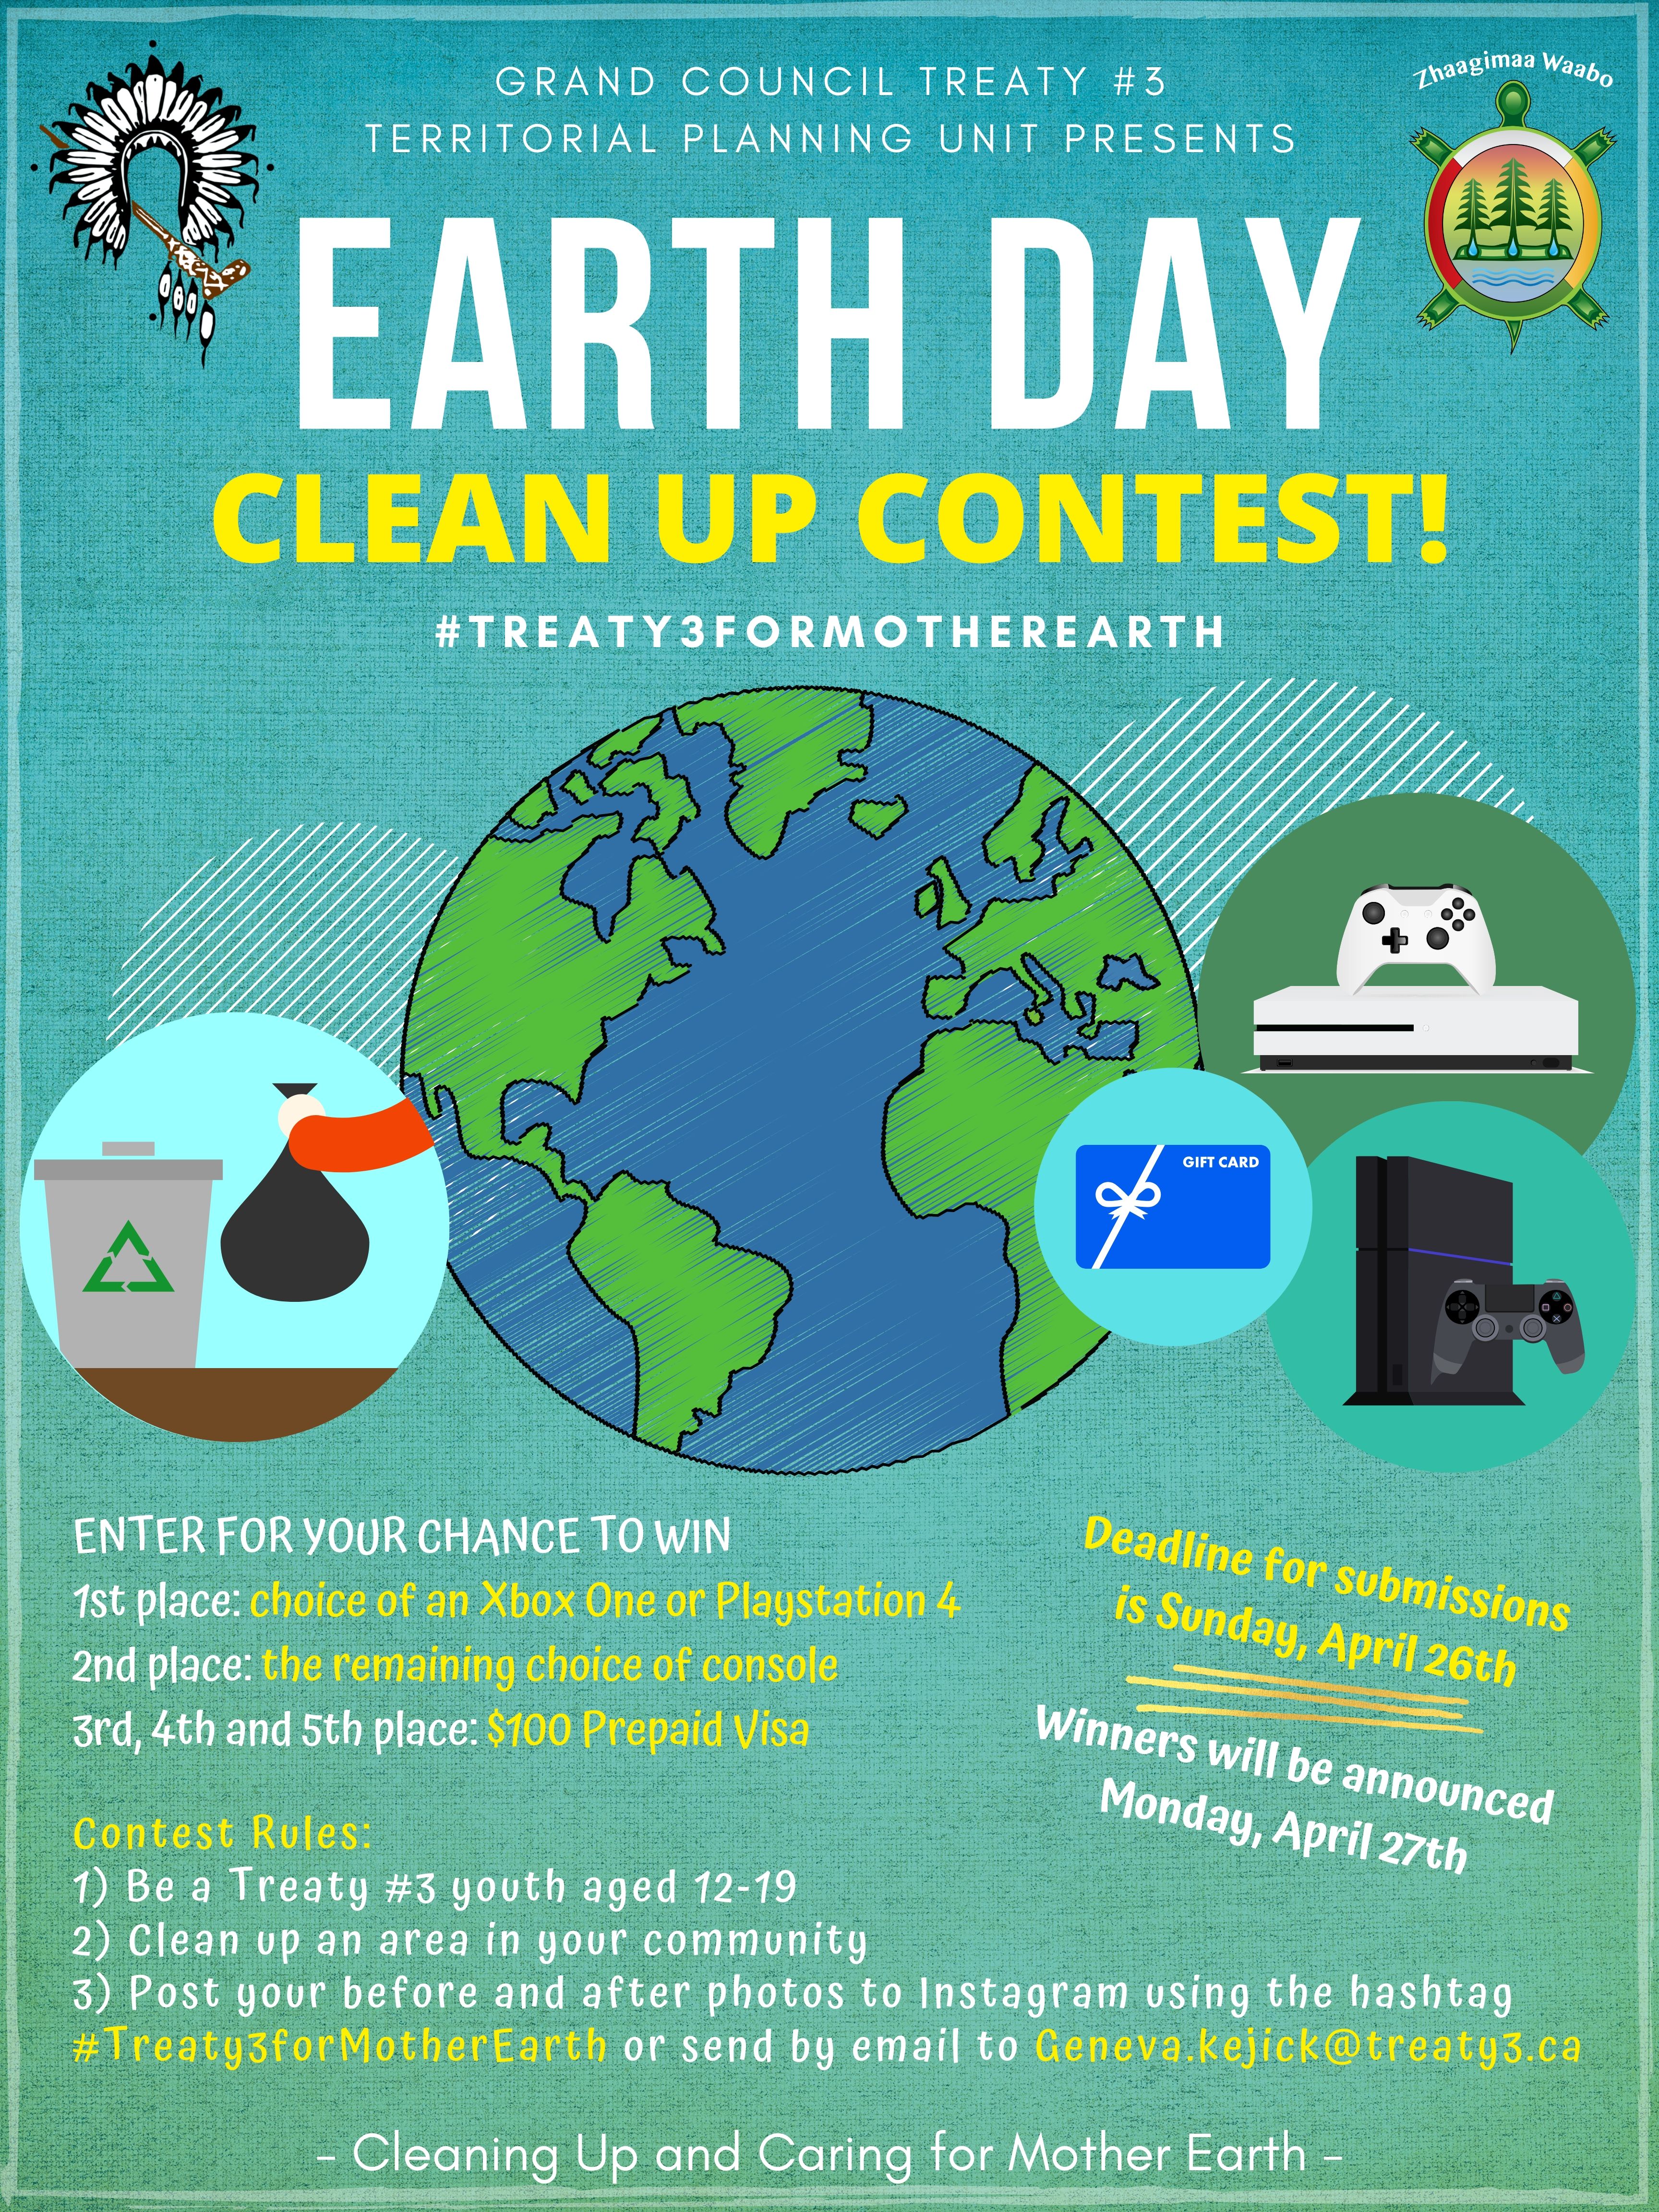 Earth Day Clean Up Contest for Treaty #3 Youth (ages 12-19)